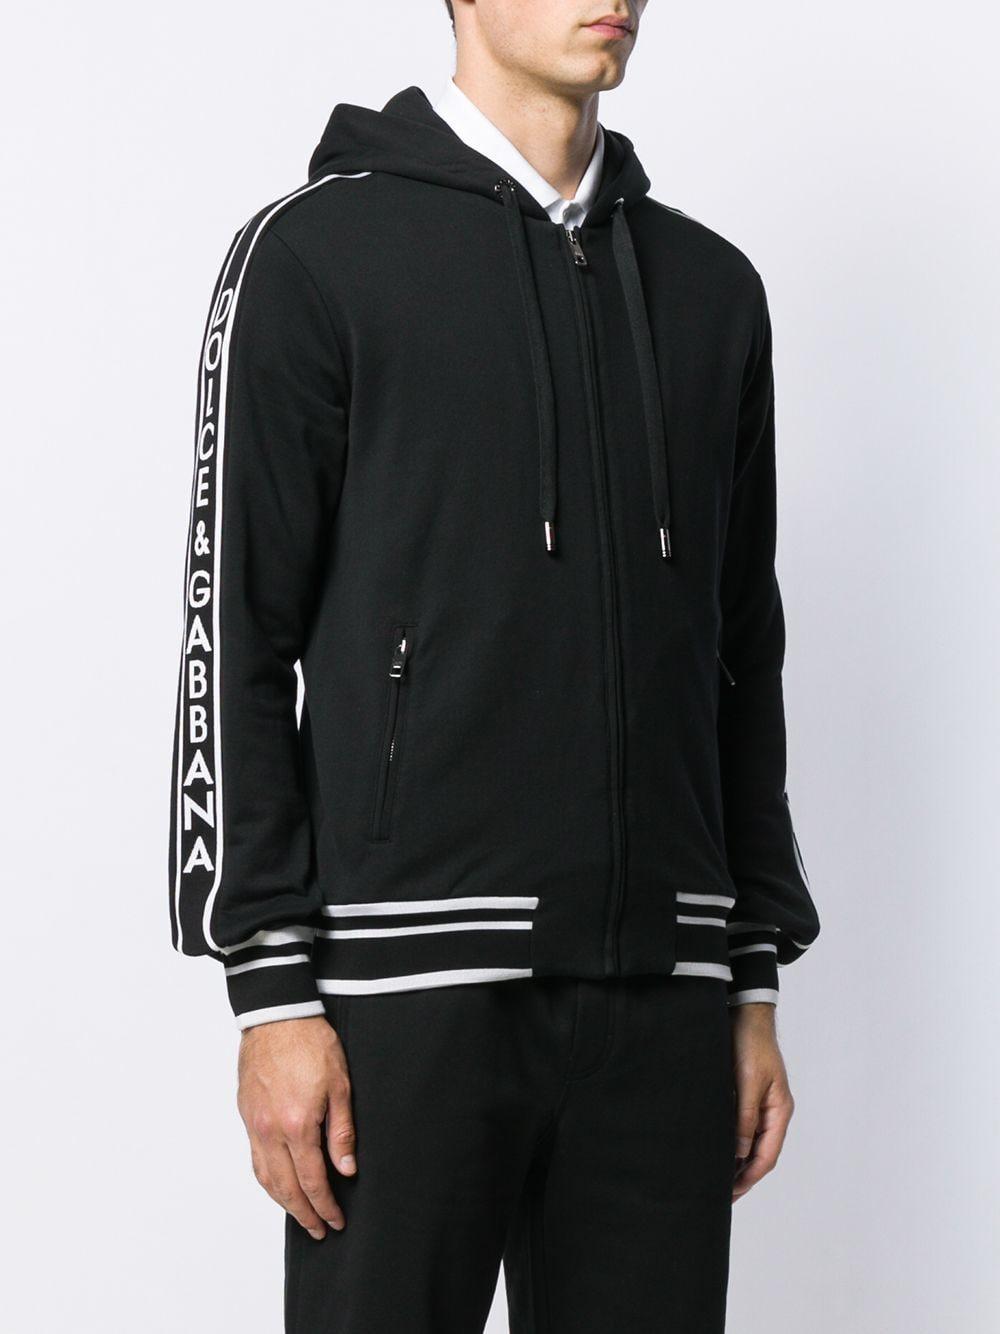 Dolce & Gabbana Cotton Piped Logo Sleeve Zip Hoodie in Black for Men - Lyst